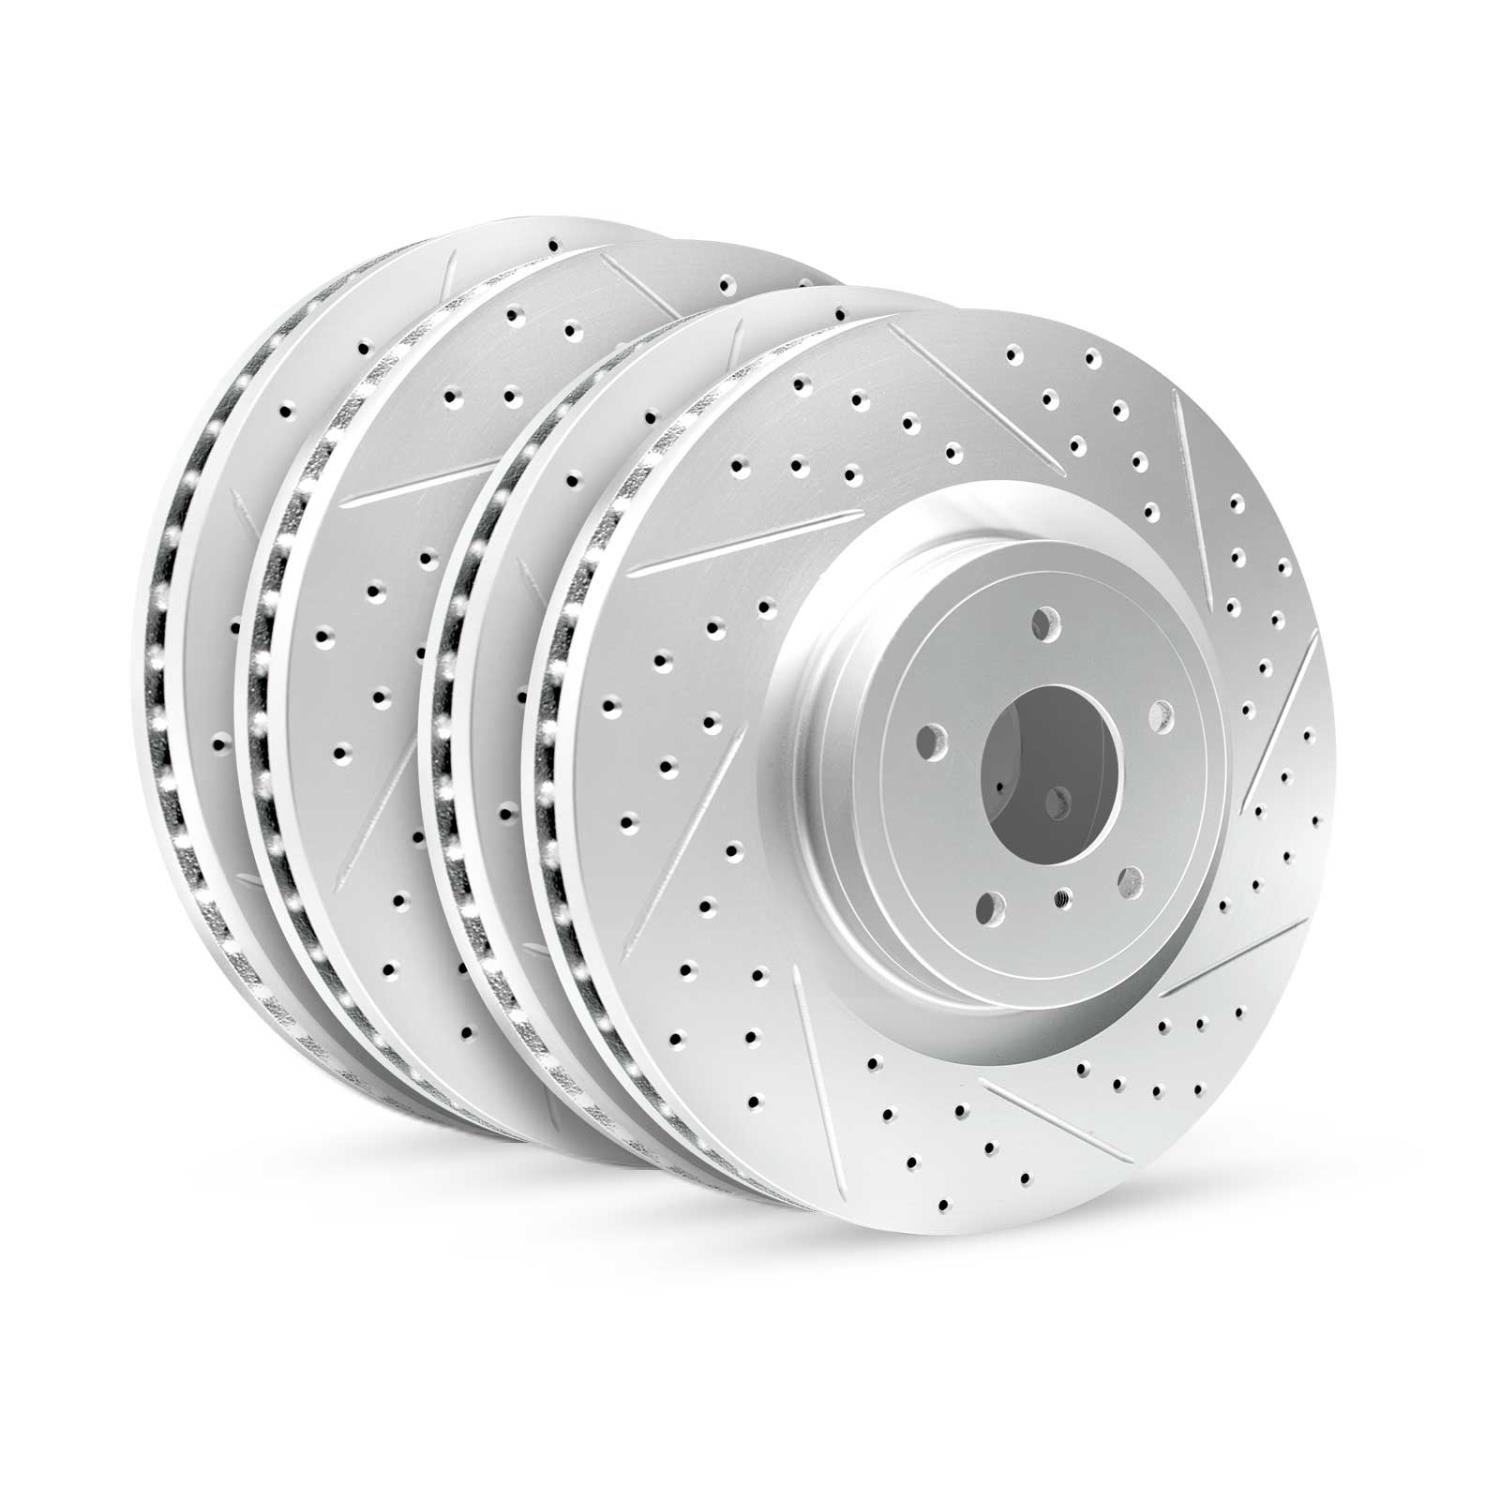 GEO-Carbon Drilled/Slotted Rotors, 1995-2002 BMW, Position: Front/Rear